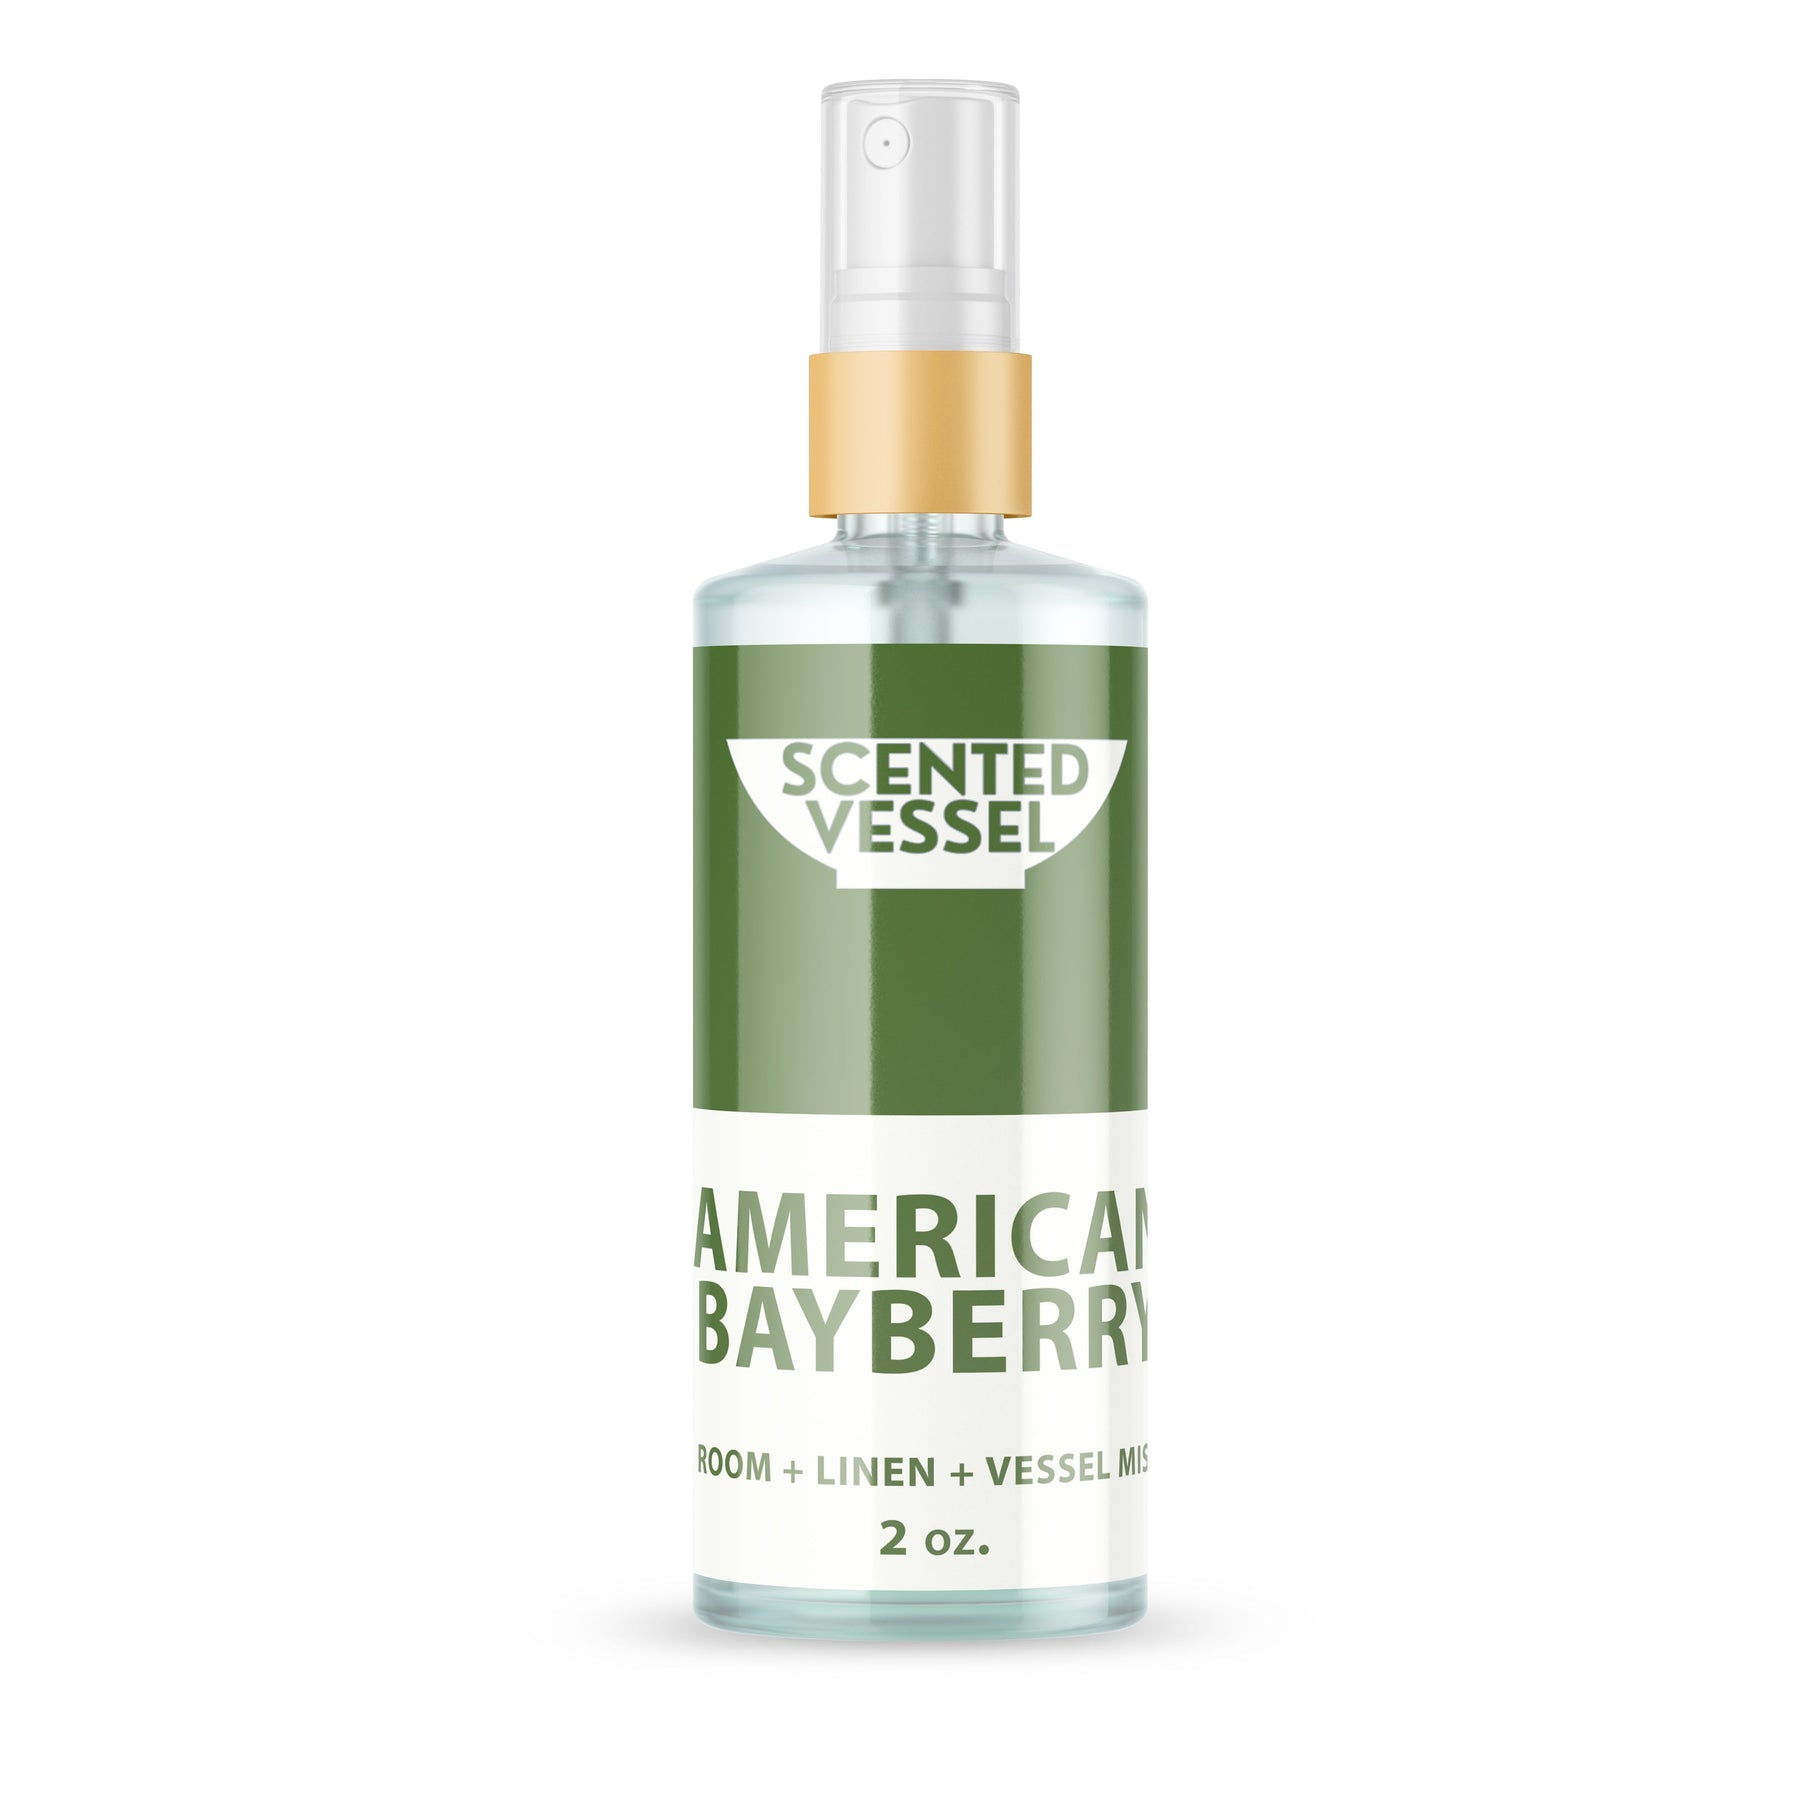 American Bayberry 2oz Fragrance Mist by Scented Vessel